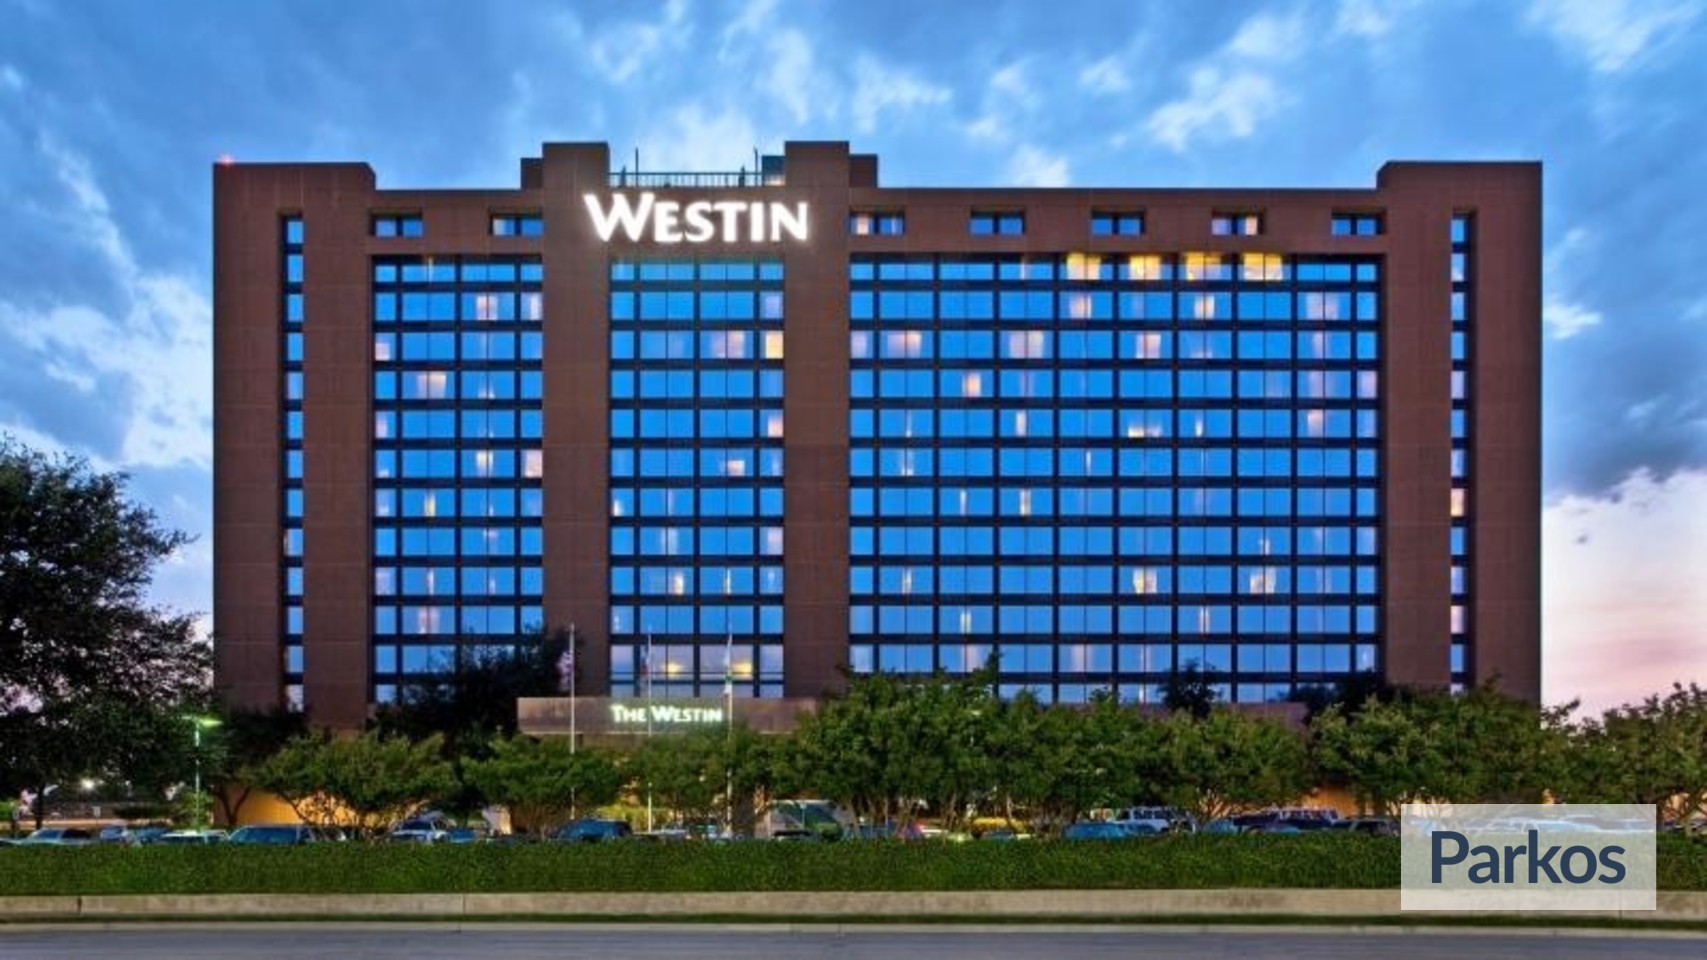 The Westin Dallas-Fort Worth (DFW) - DFW Airport Parking - picture 1